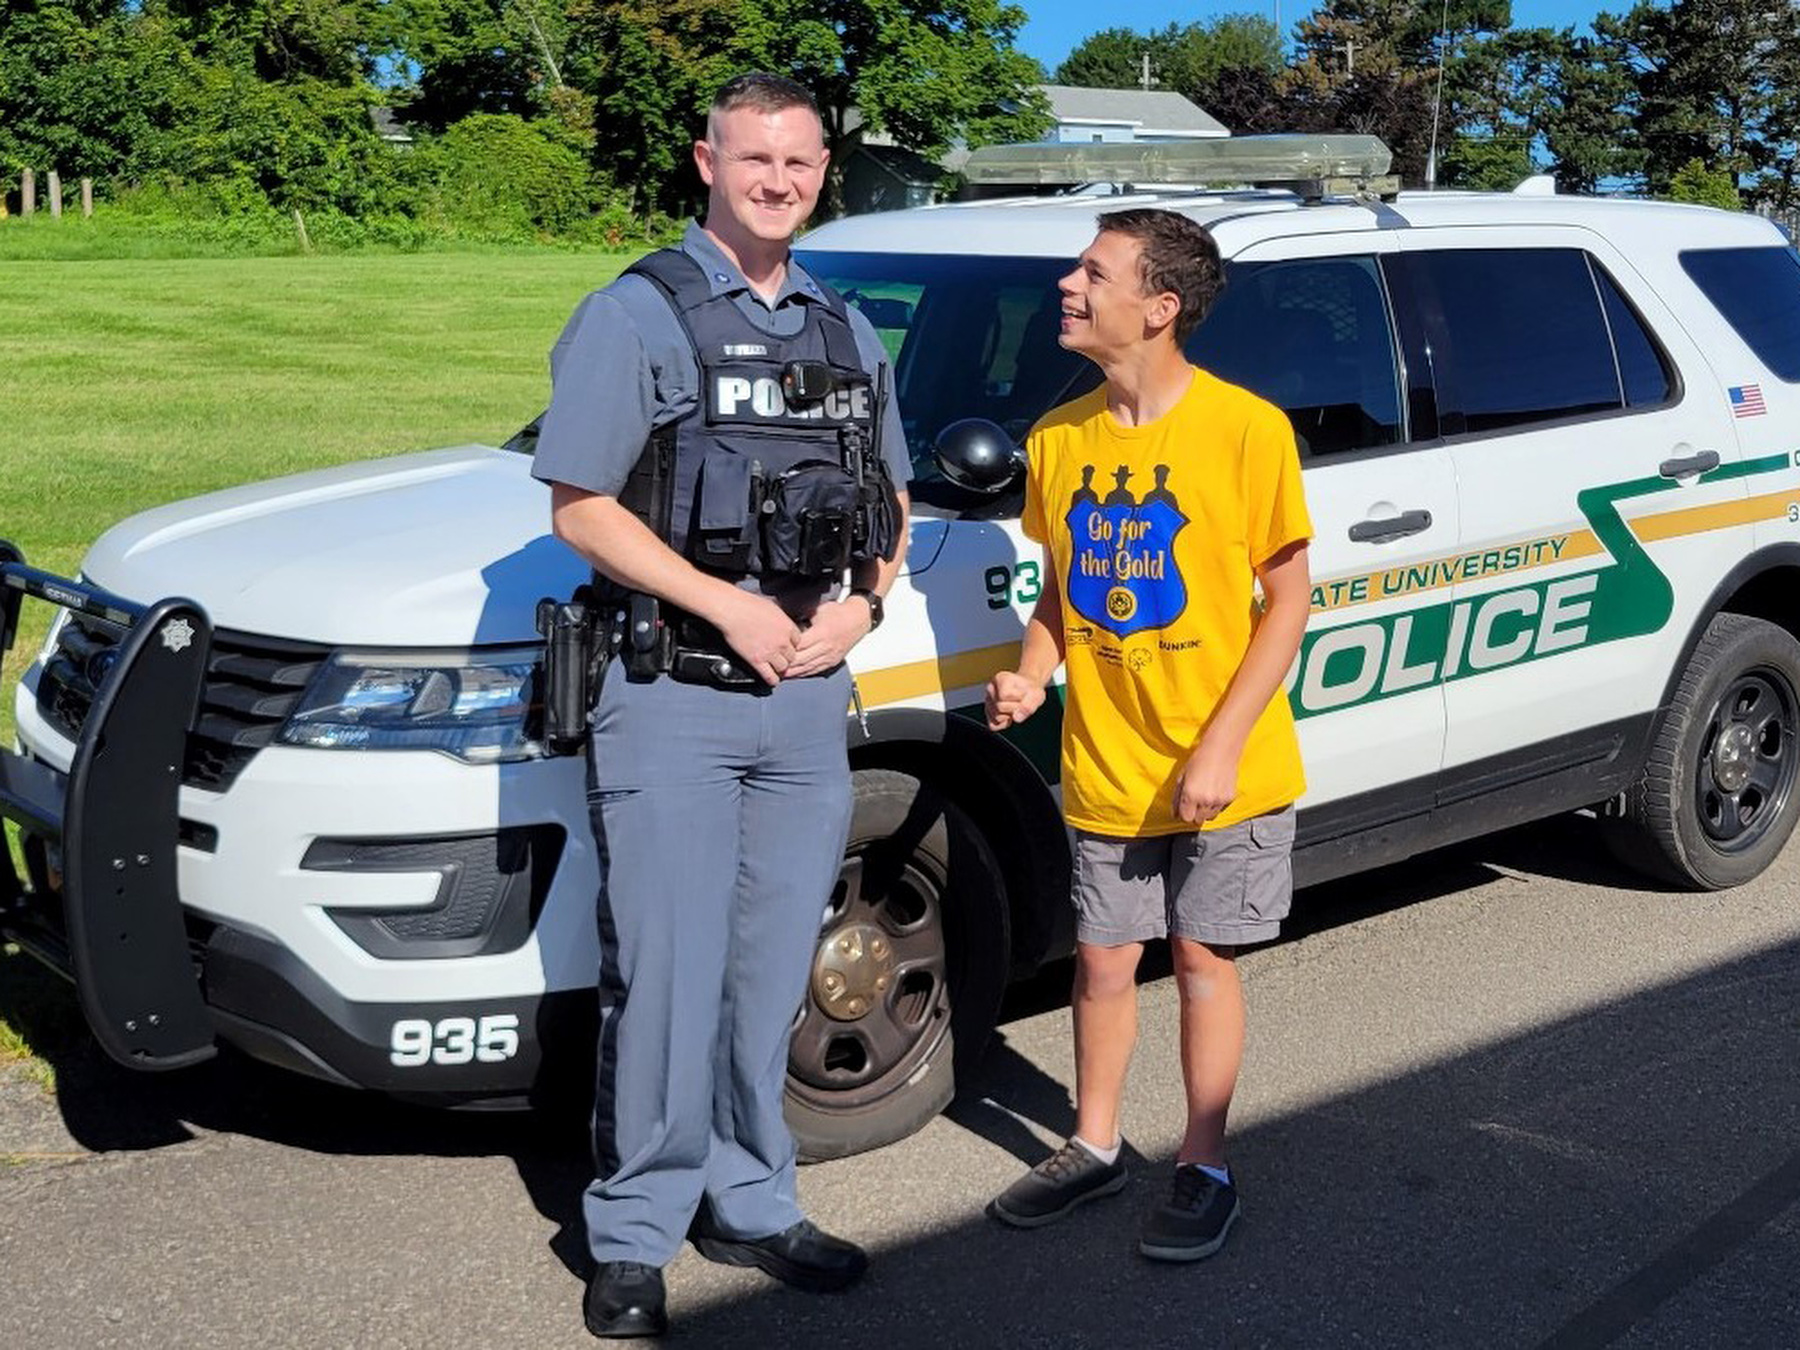 University Police continued its longstanding partnership with Special Olympics by raising $1250 in donations during an Aug. 11 "Go For The Gold" fundraiser at the Dunkin' Donuts just off campus. Shown are Officer Scott Maynard with participant Lou Wildrick from Oswego.